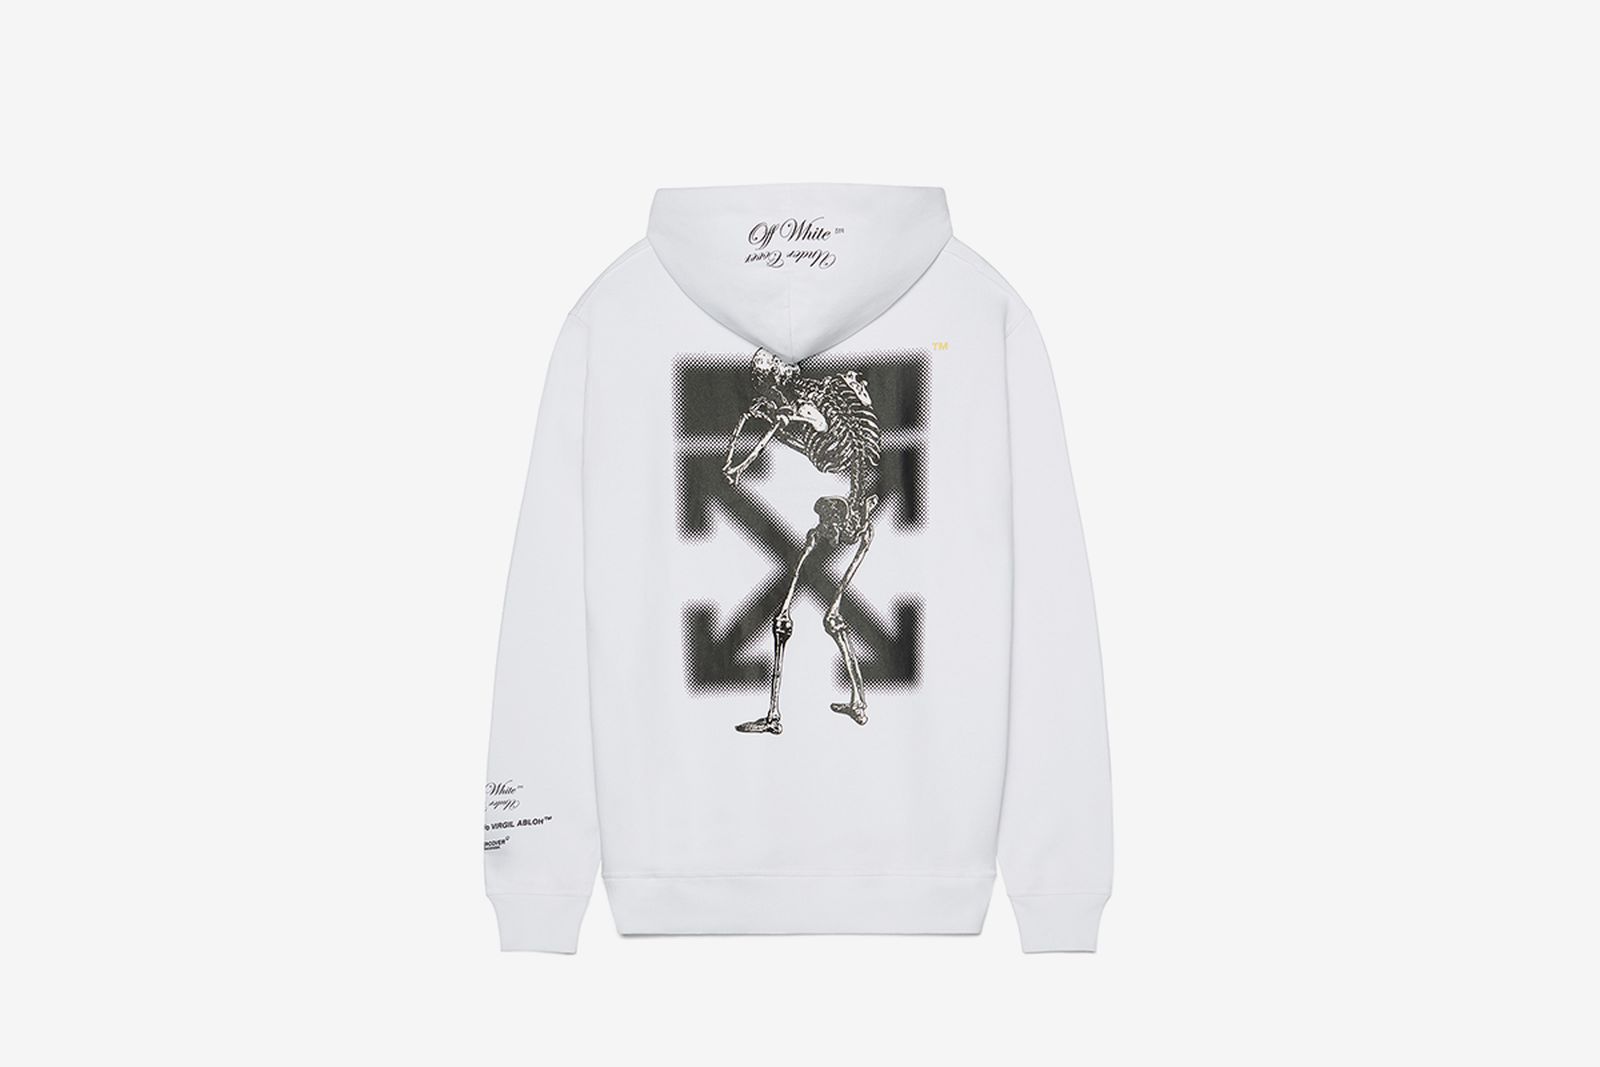 Off-White UNDERCOVER hoodie white